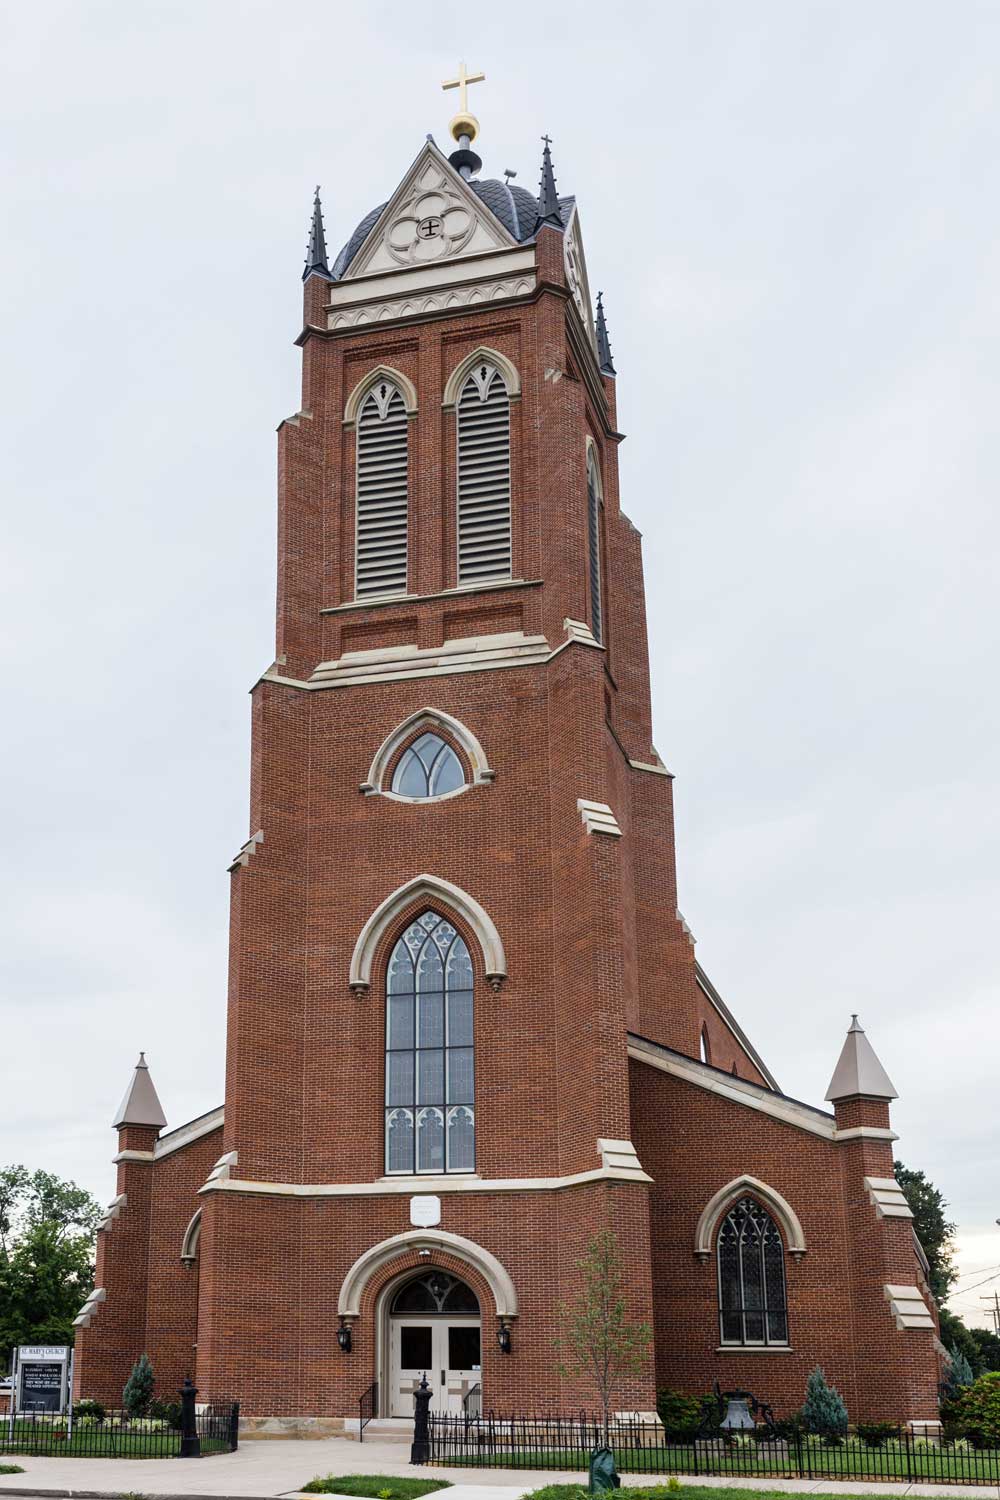 Exterior shot of a tall church with shutters and stained glass windows.